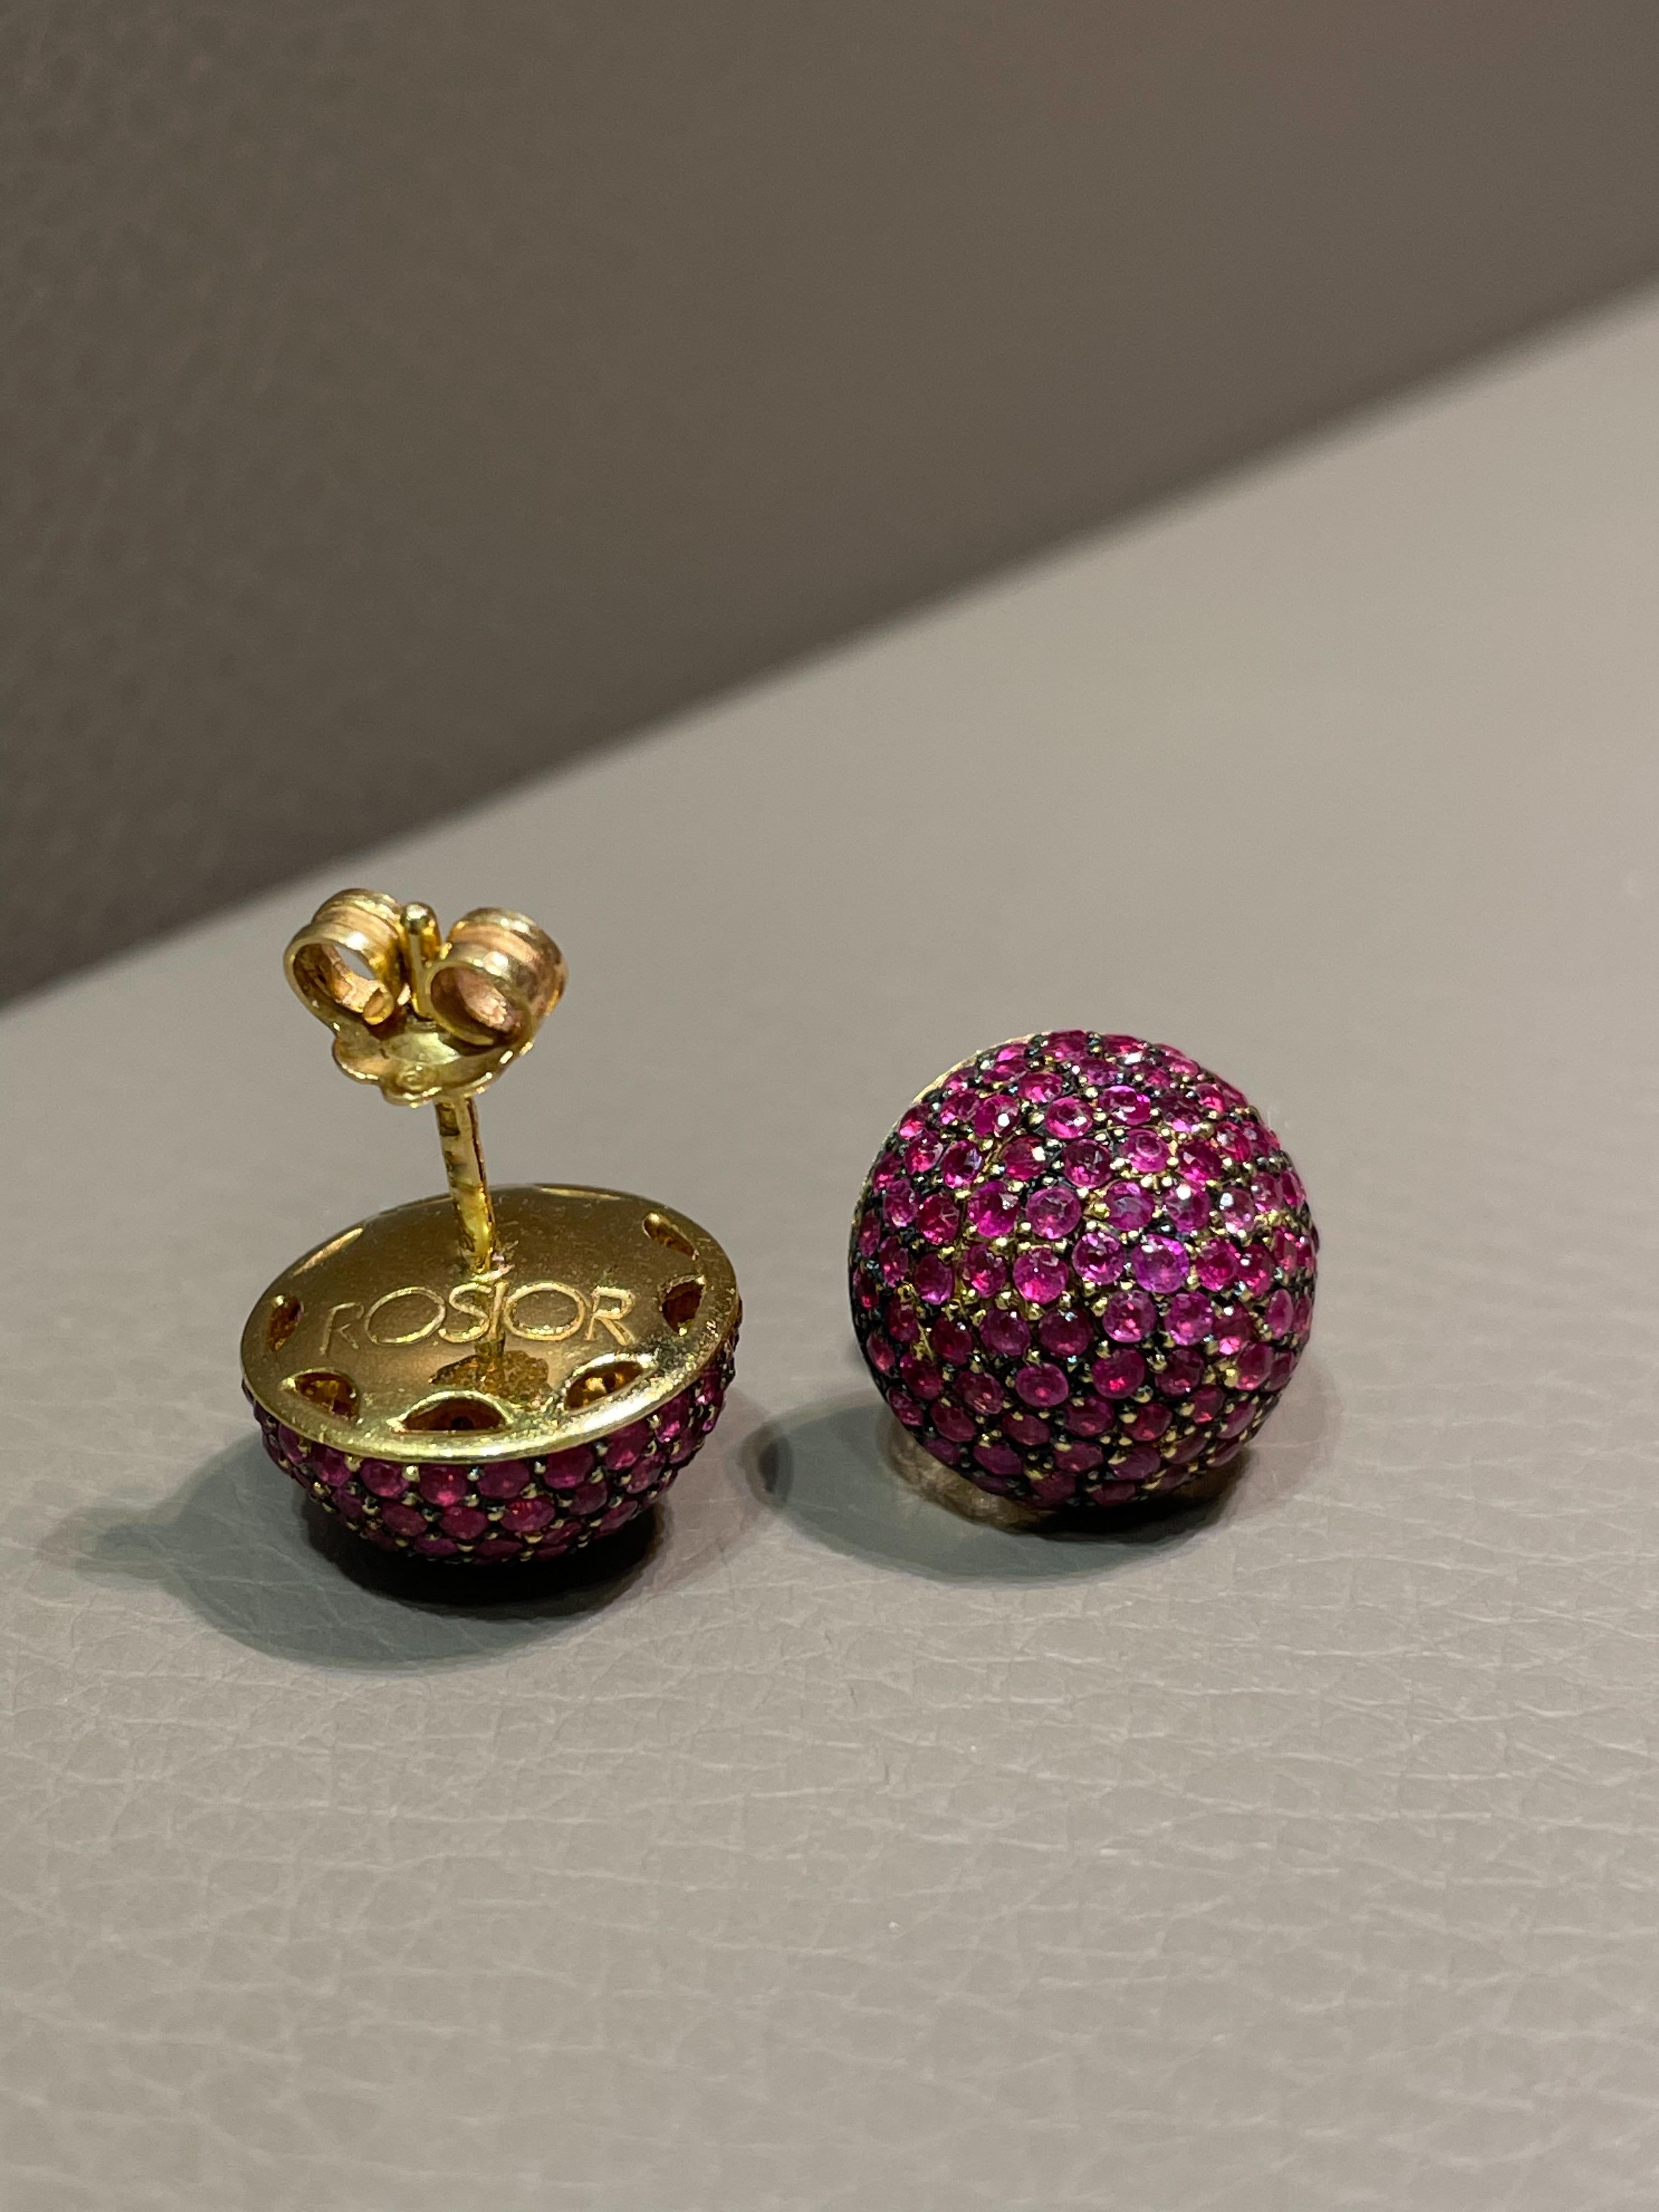 Contemporary Rosior Stud Earrings Set with Rubies in Yellow Gold  For Sale